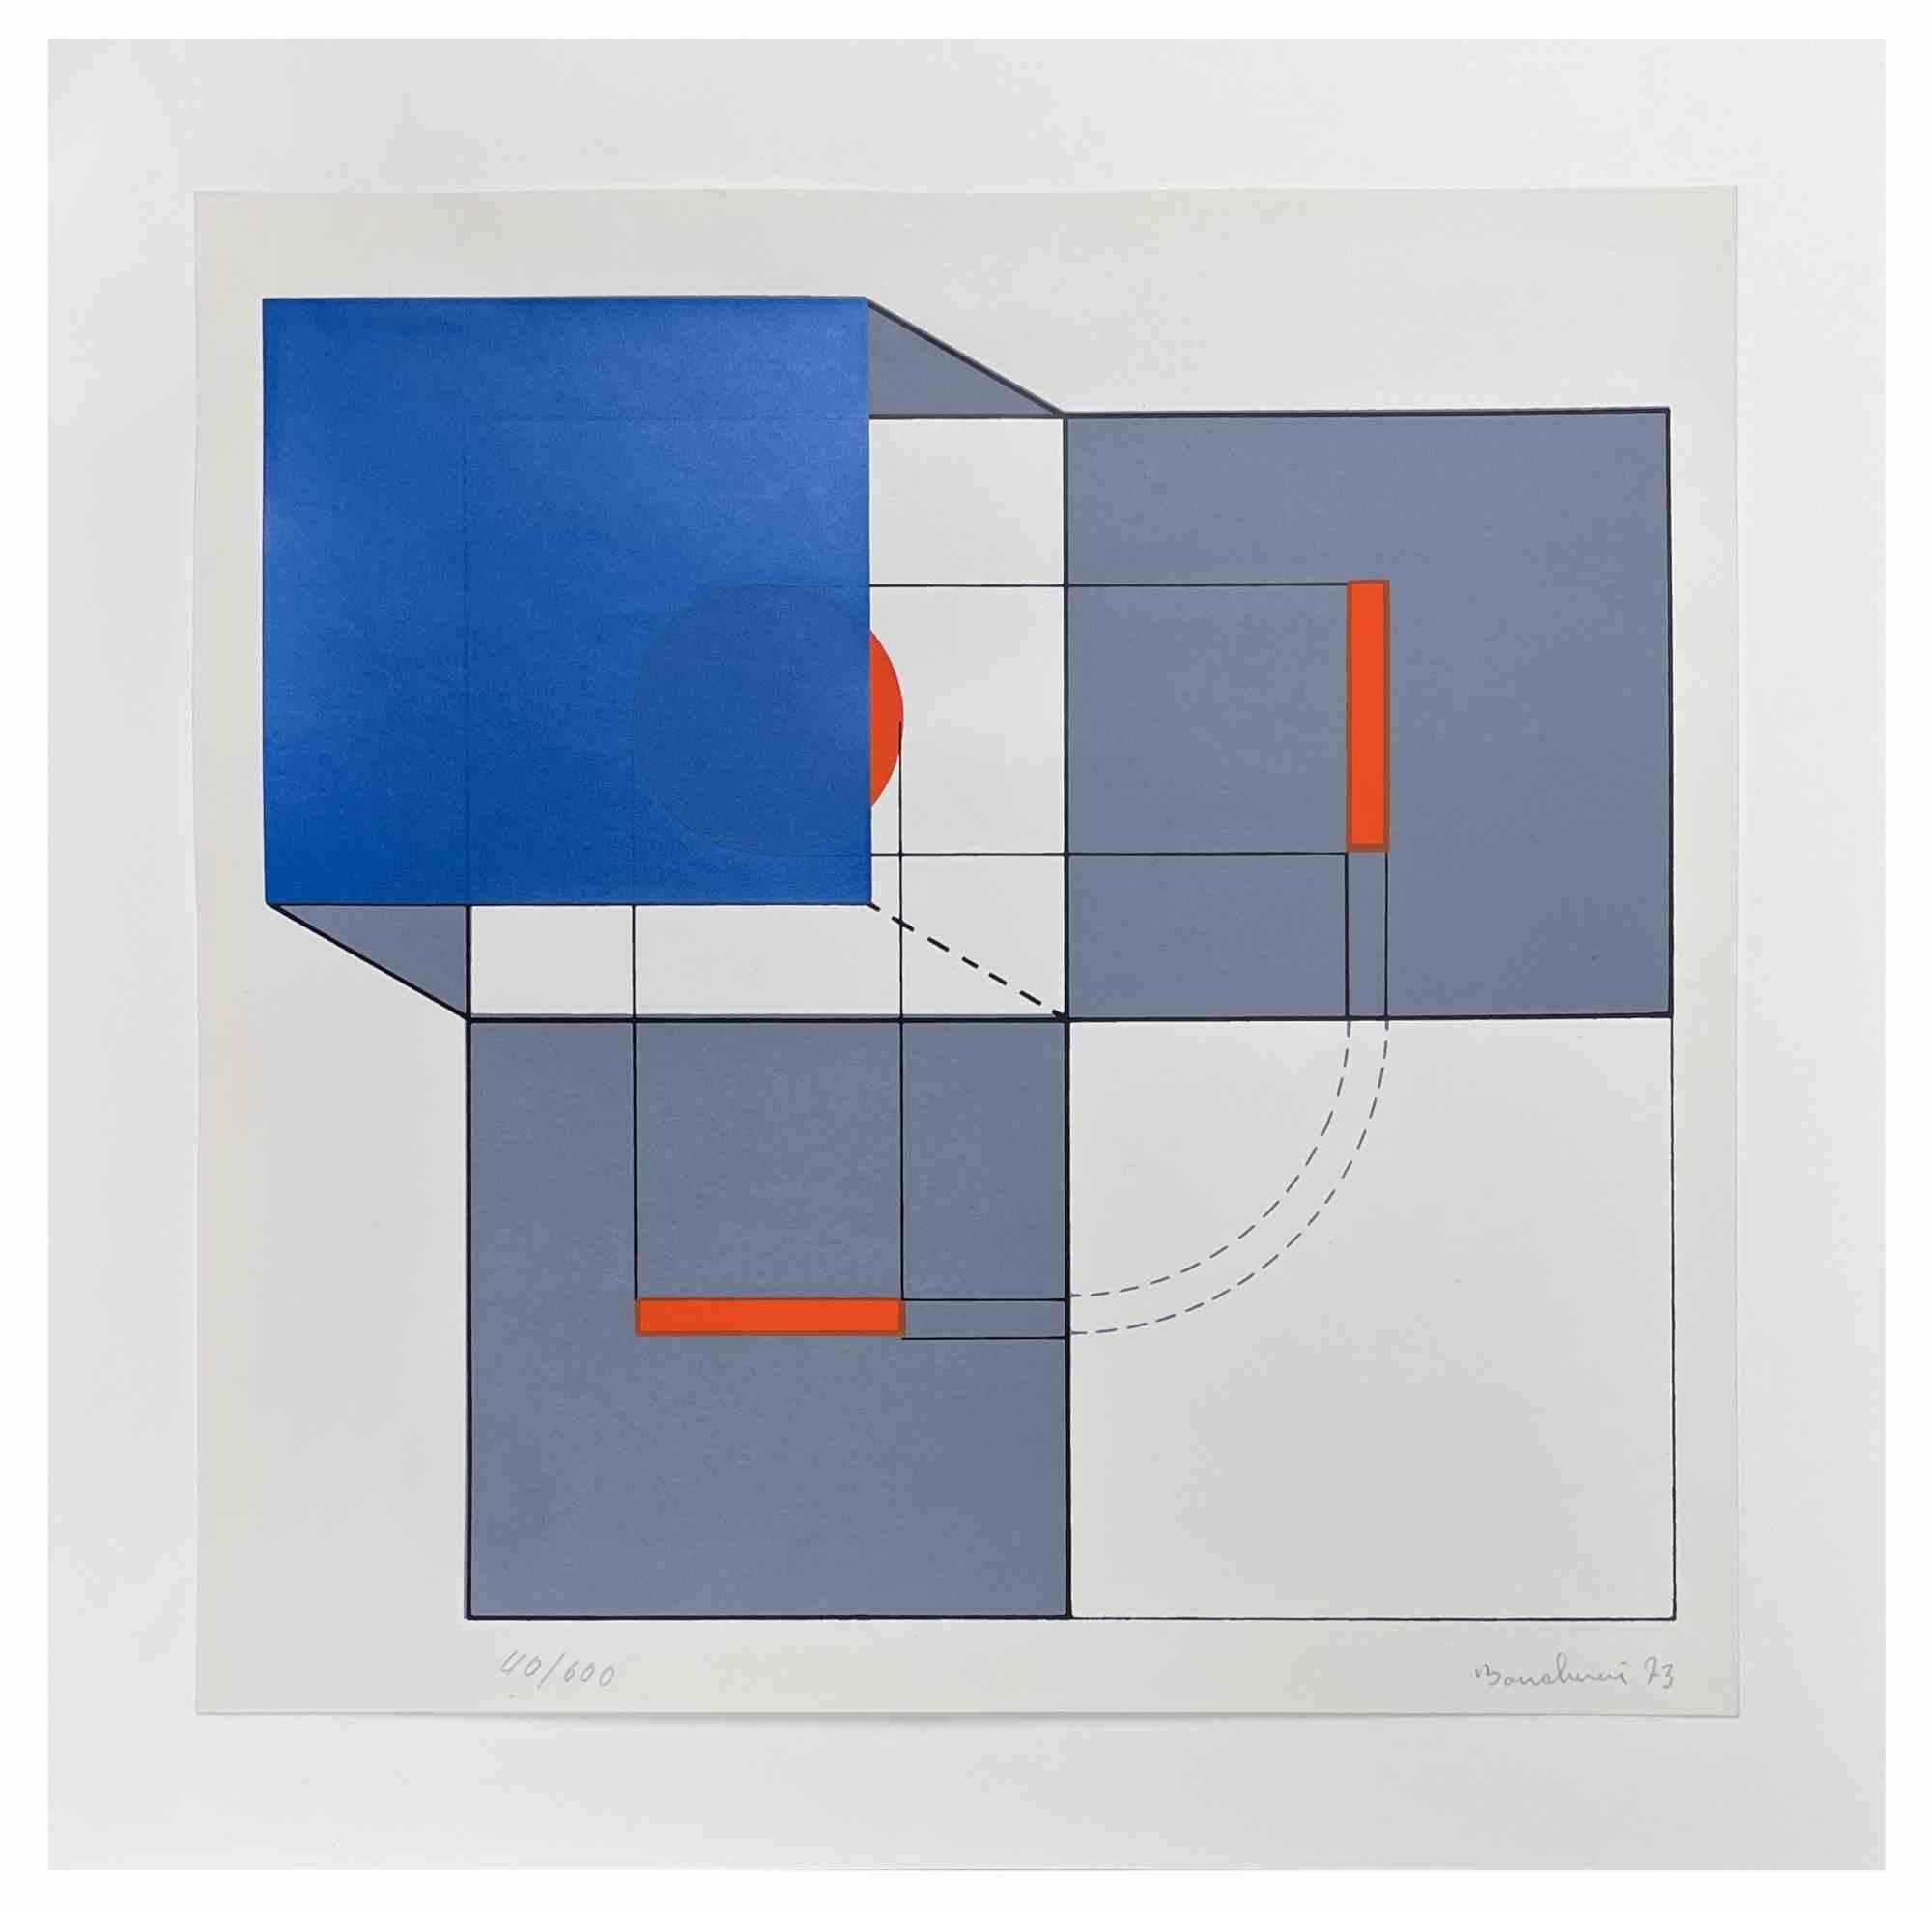 Abstract Composition is an artwork realized by Agostino Bonalumi, 1973.

Silkscreen on paper.

Edition of 600.

cm 23x23. 

Good conditions